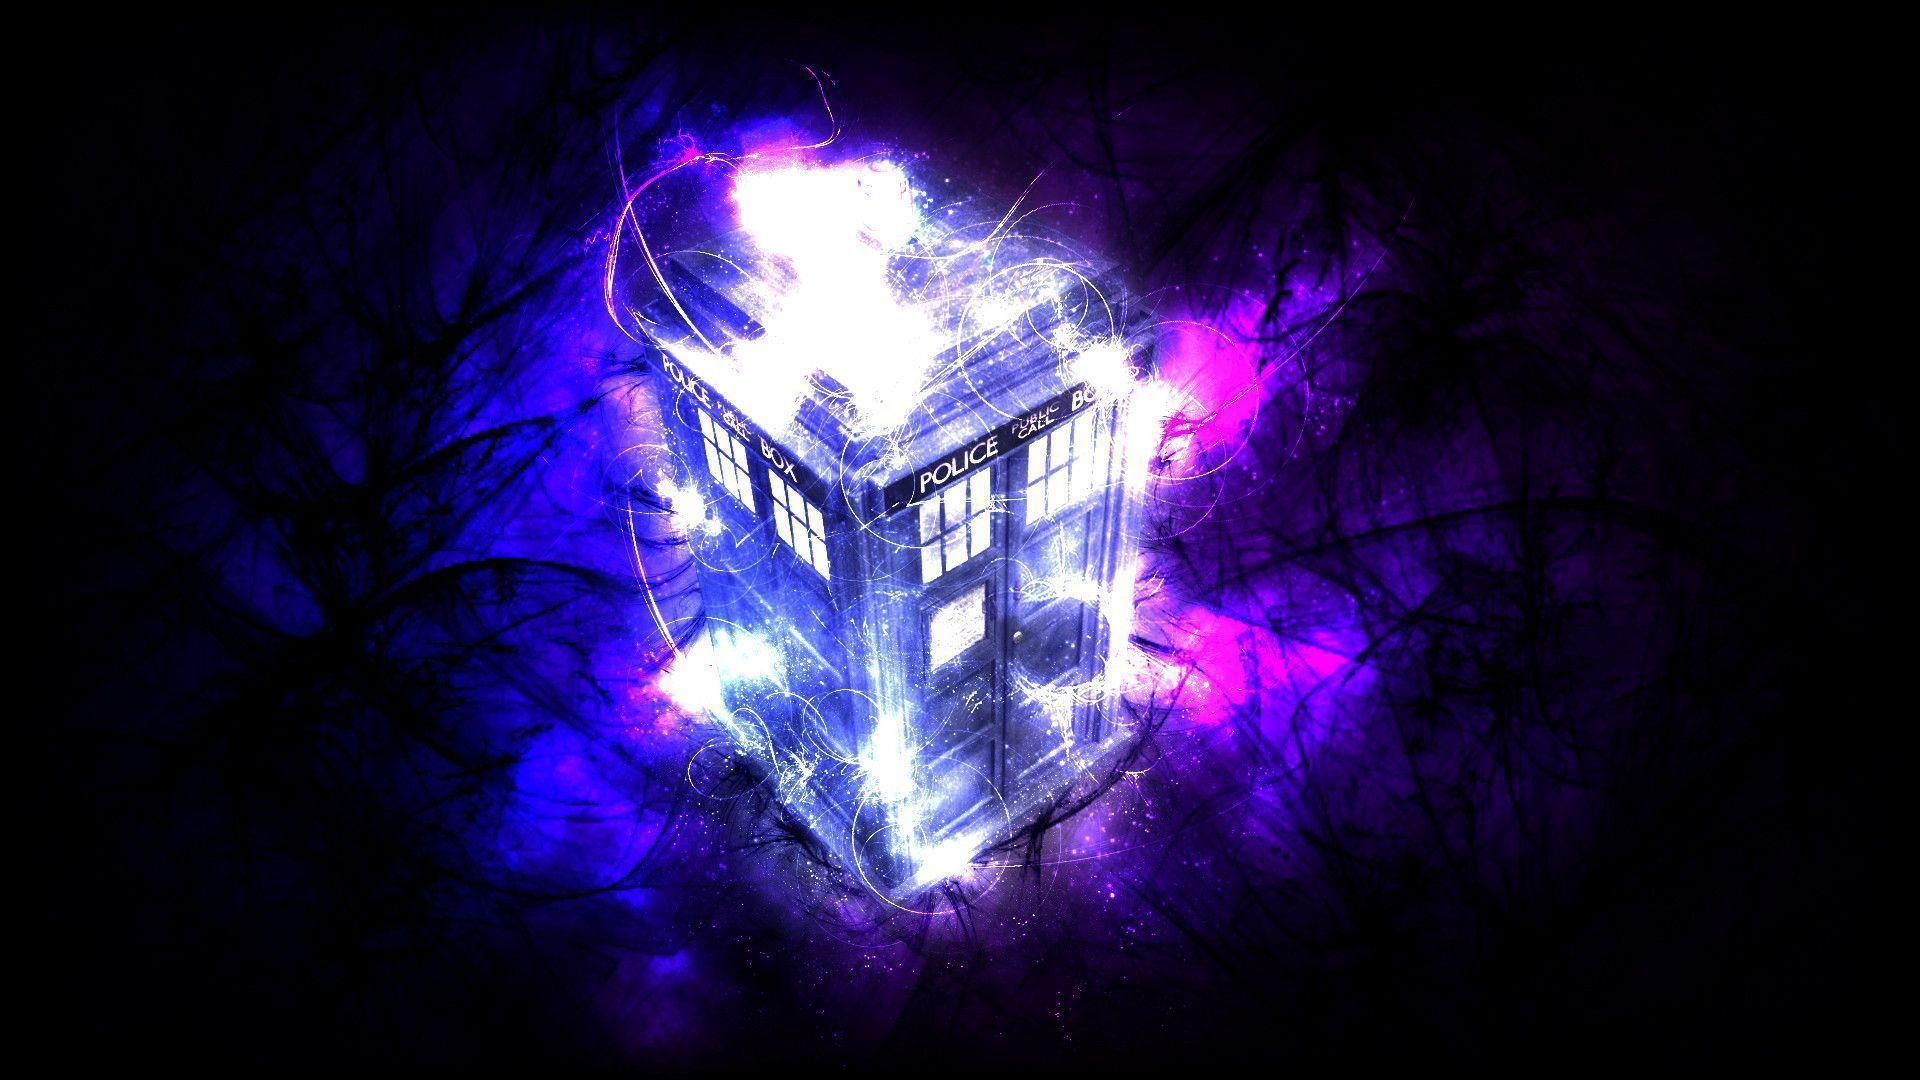 Movie Doctor Who Backgrounds Dr Wallpapers 1920x1080PX ~ Wallpapers